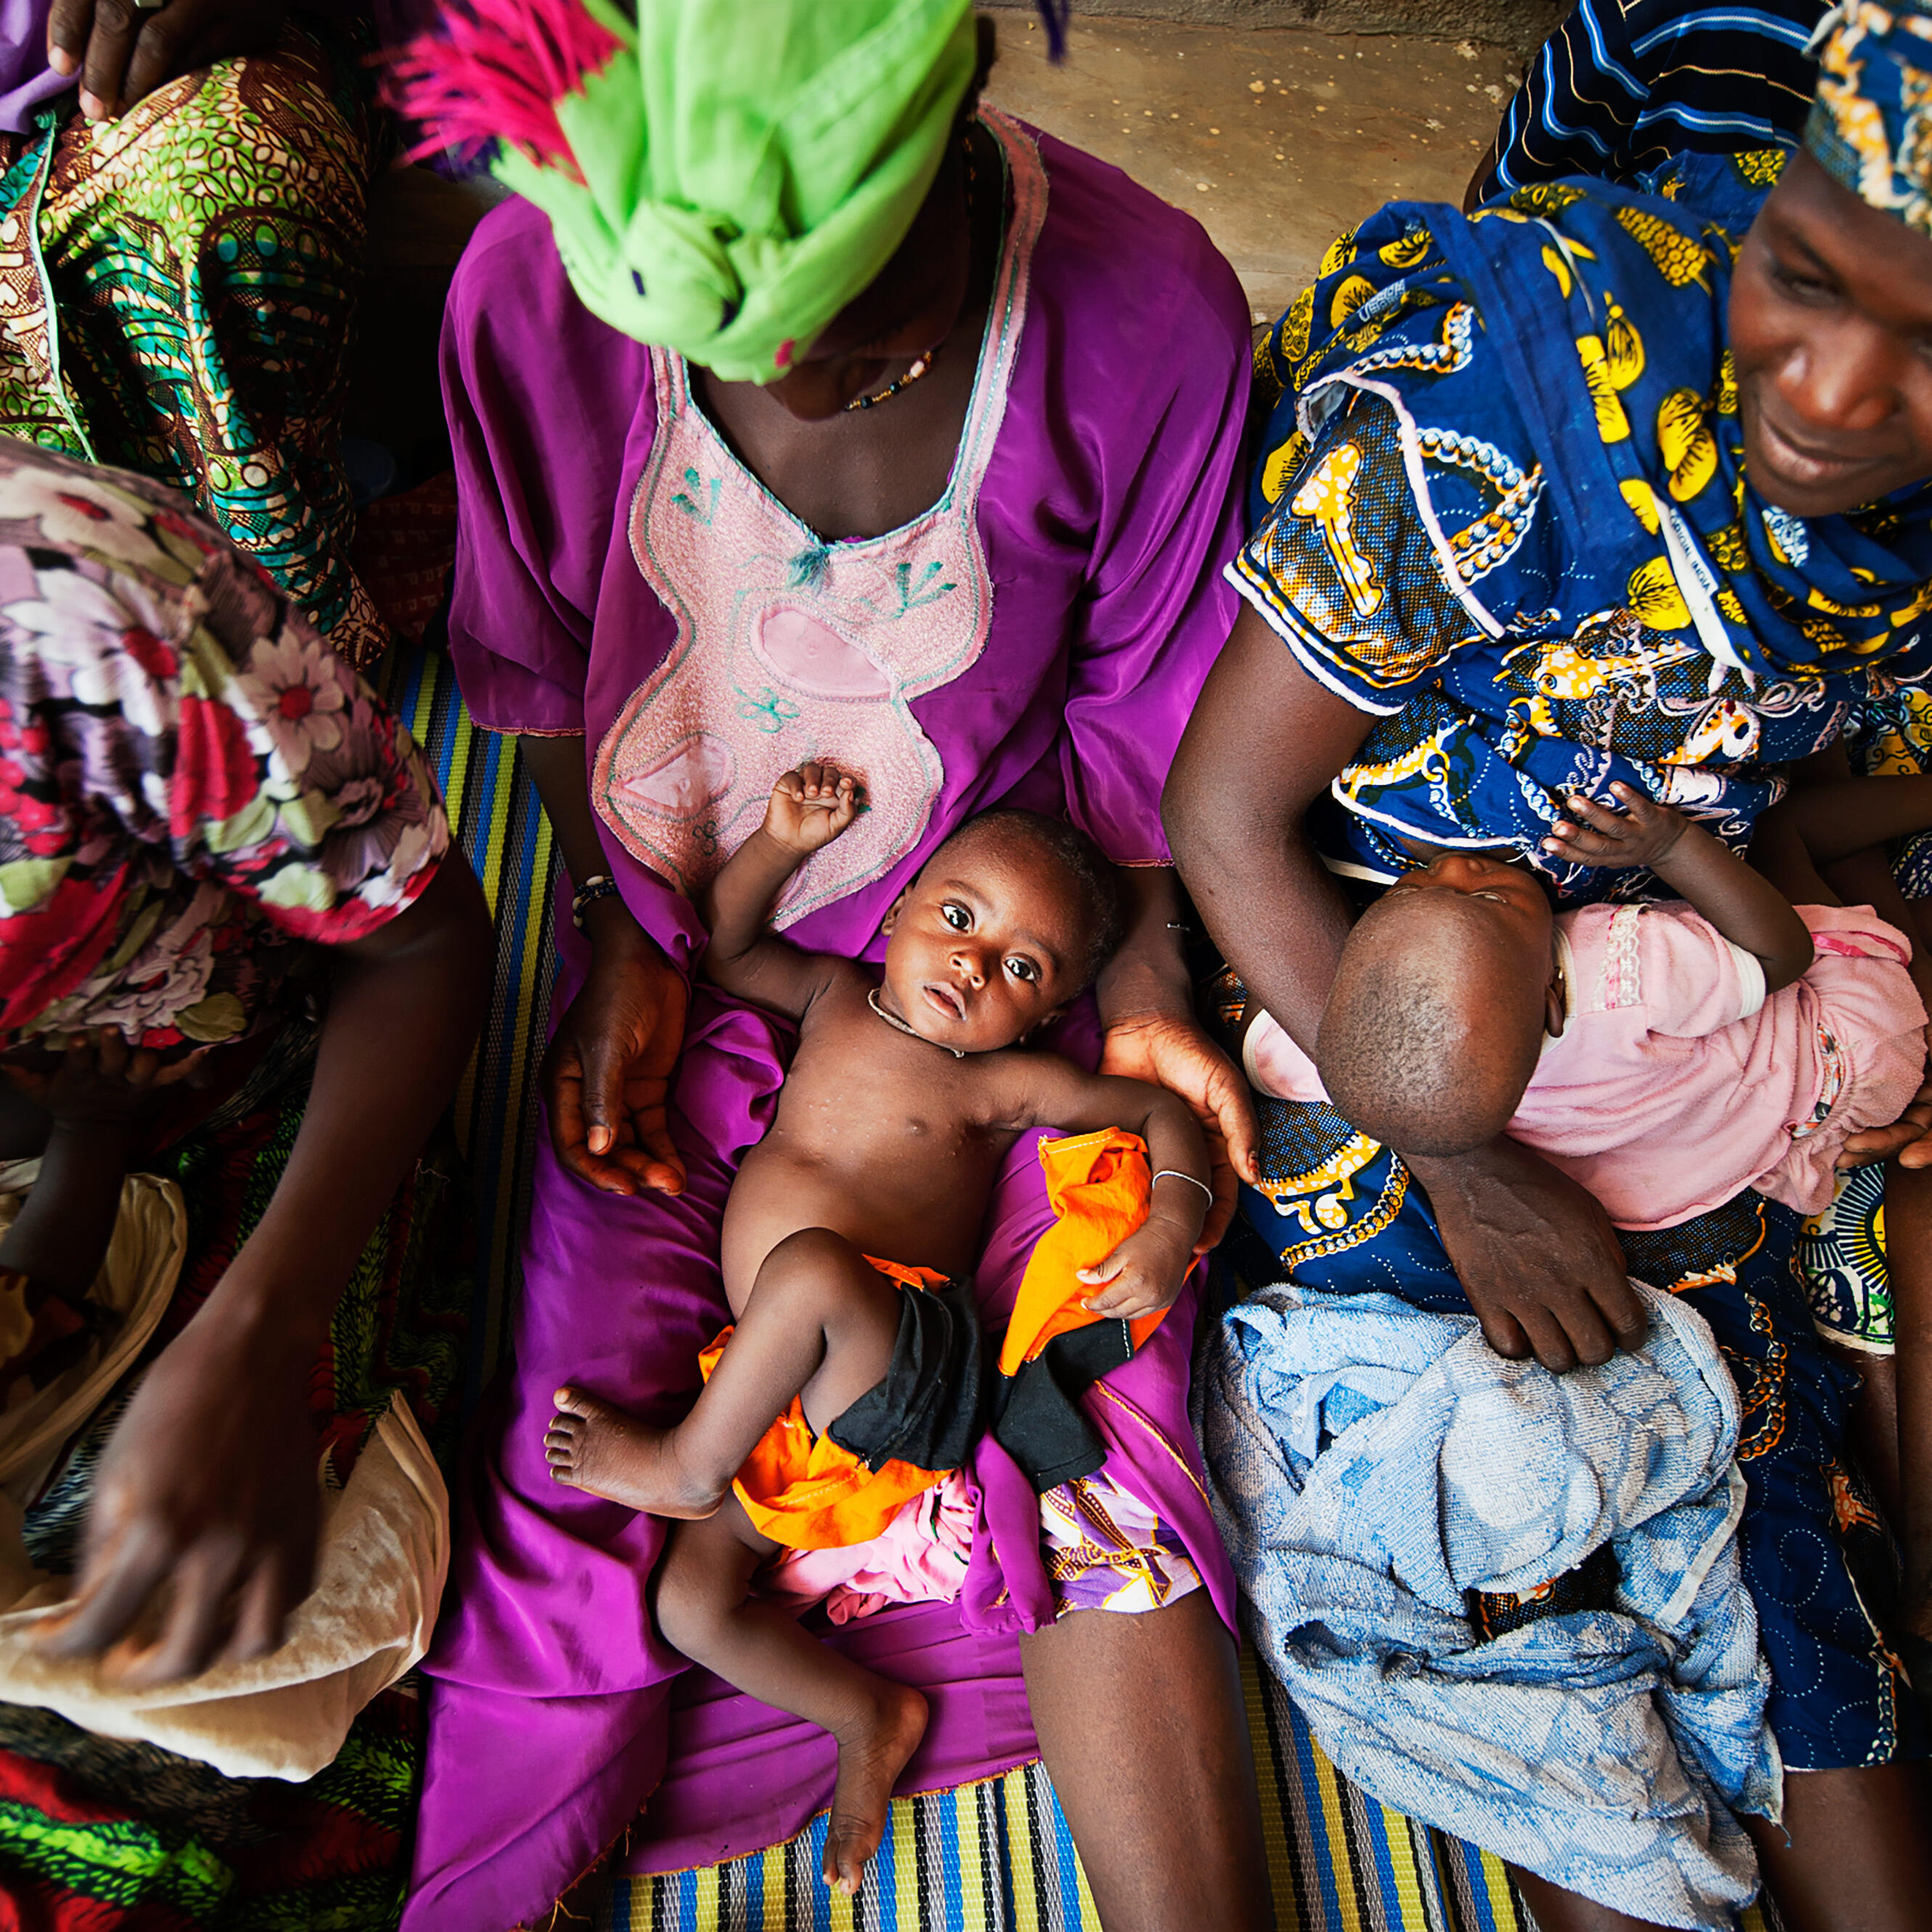 Malian women wearing brightly colored clothing hold children as they are measured and weighed.